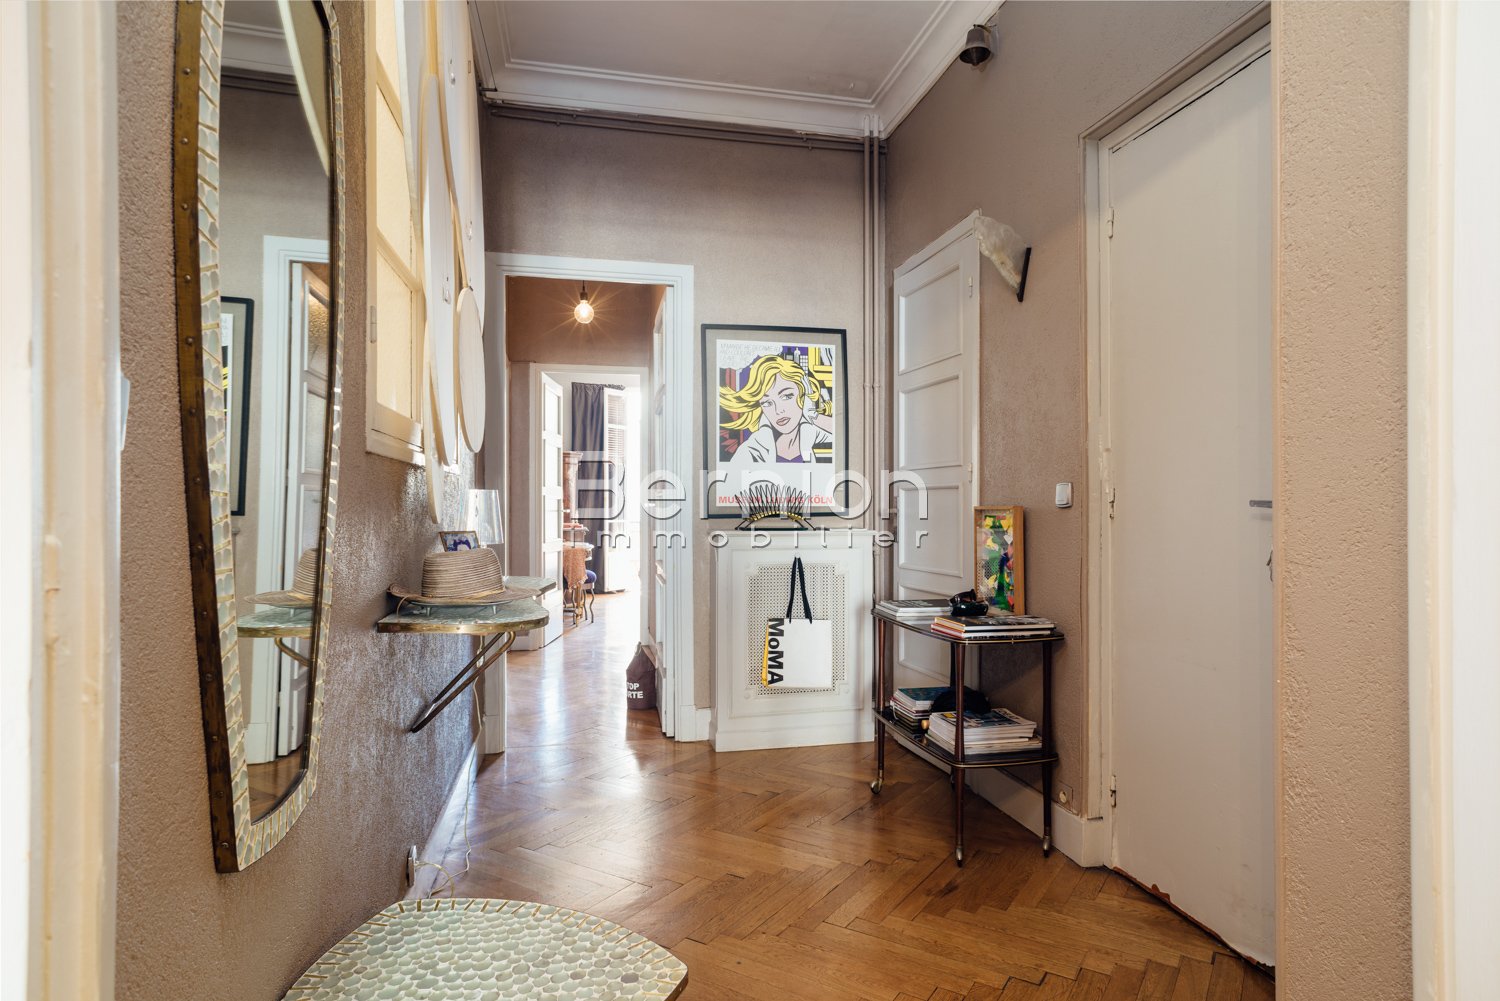 For Sale, Nice City Center Beautiful 72 sqm Apartment with terrace in Art Deco Building / photo 16